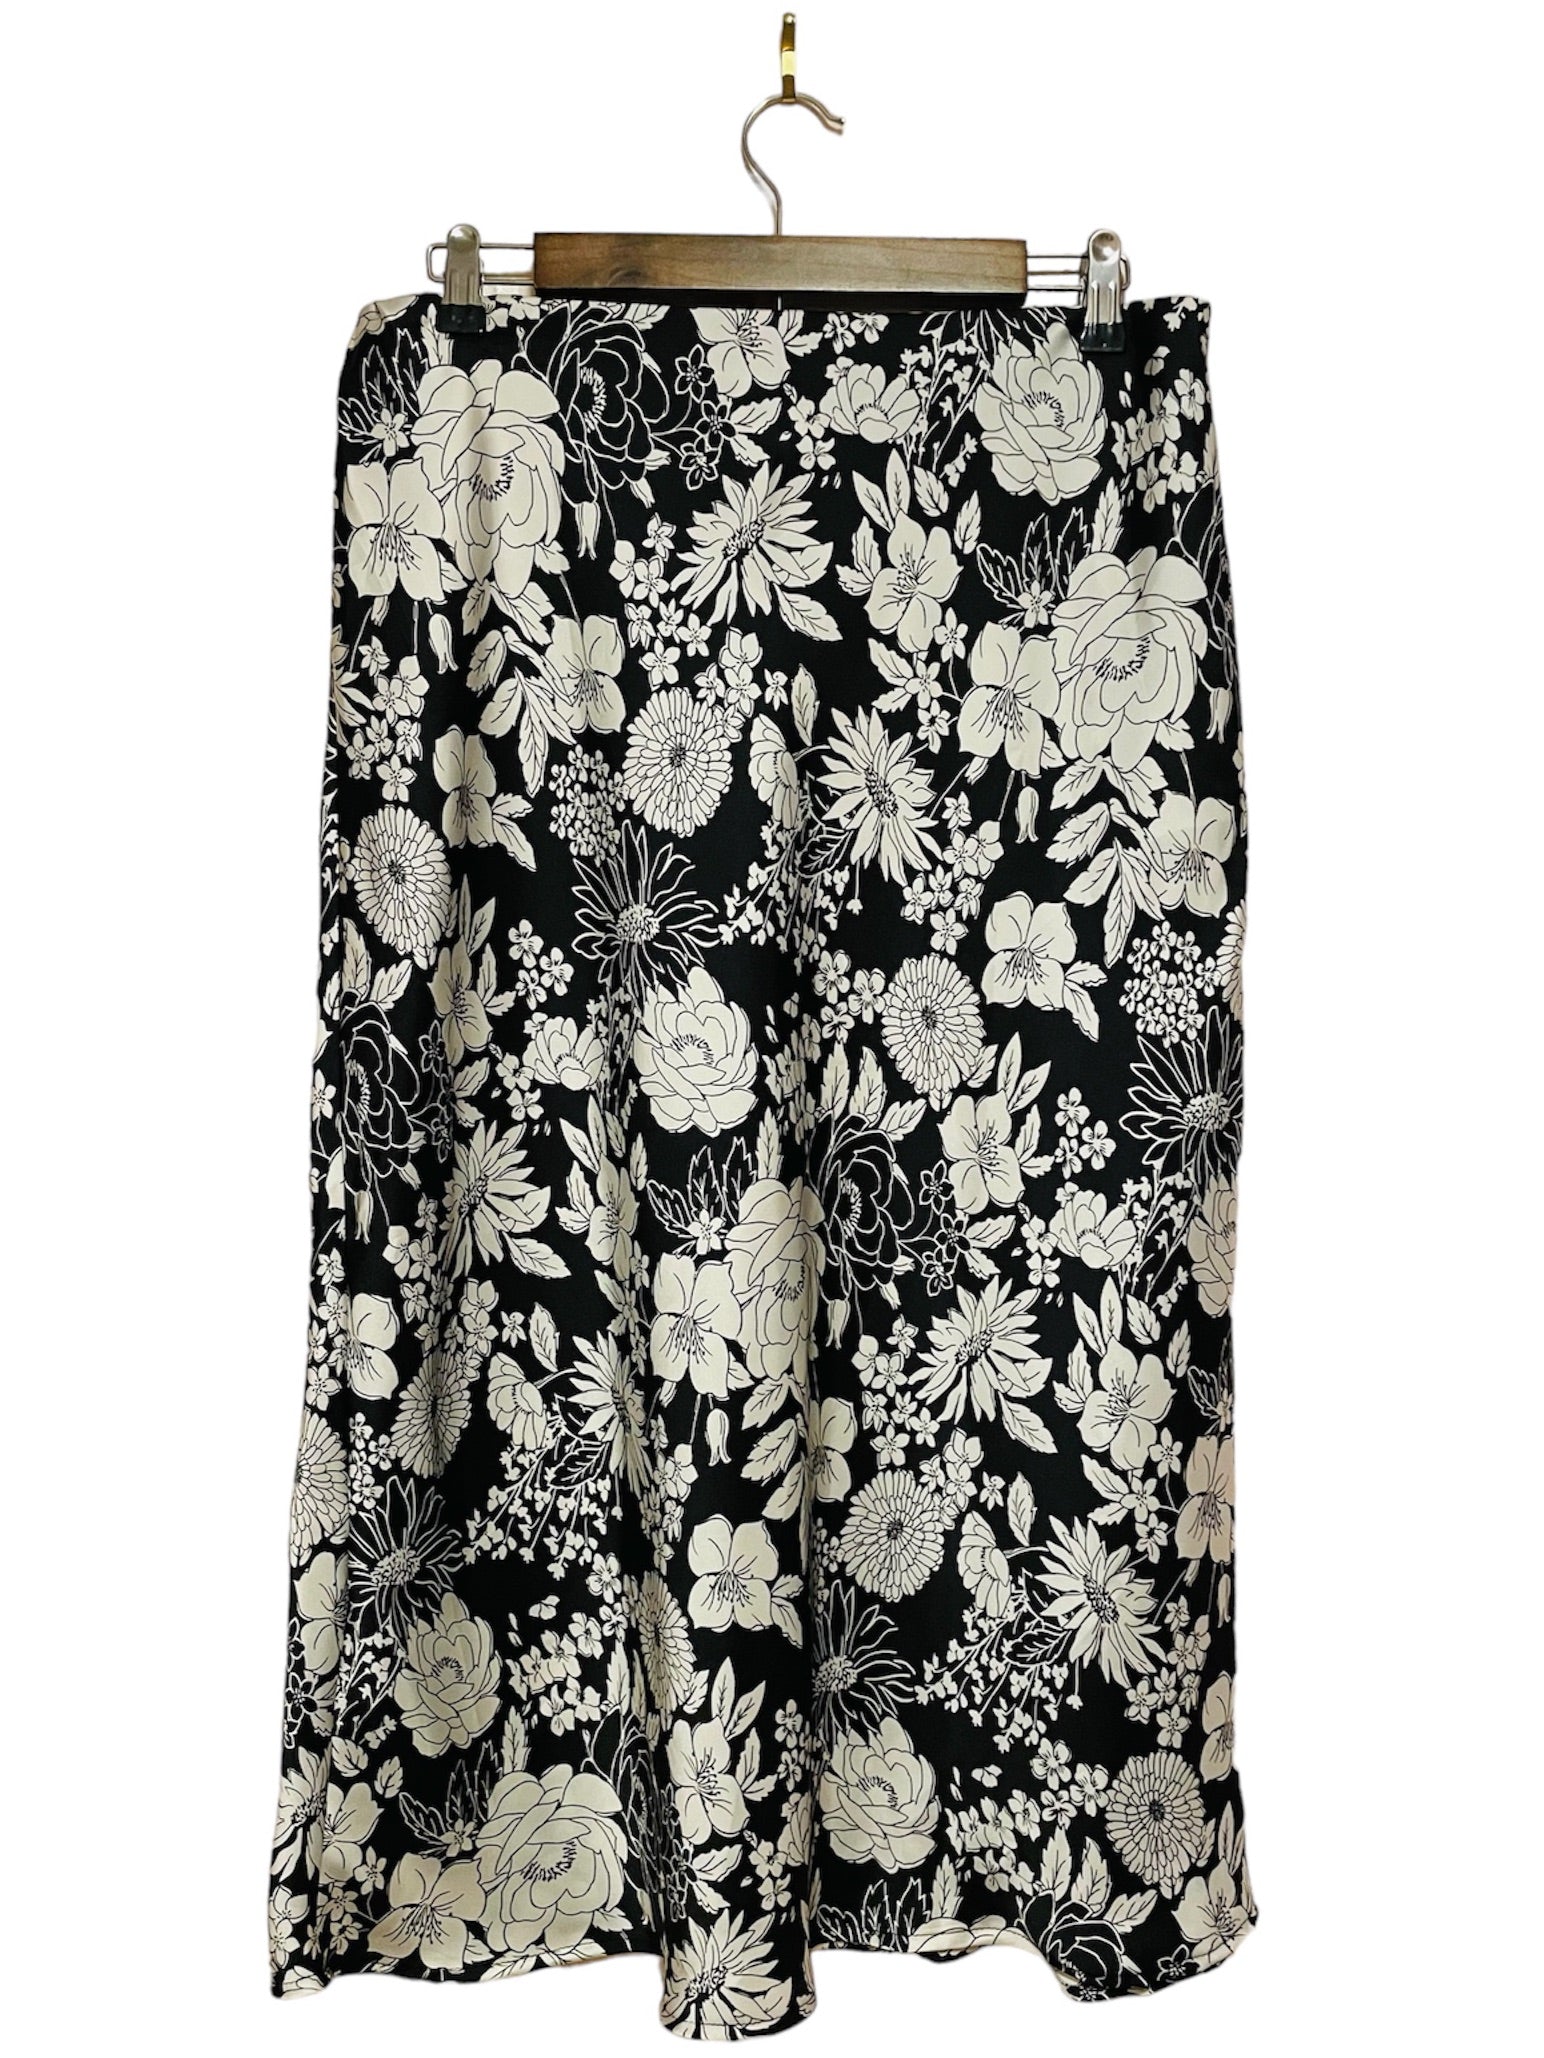 Black and White Floral Skirt Size: Large